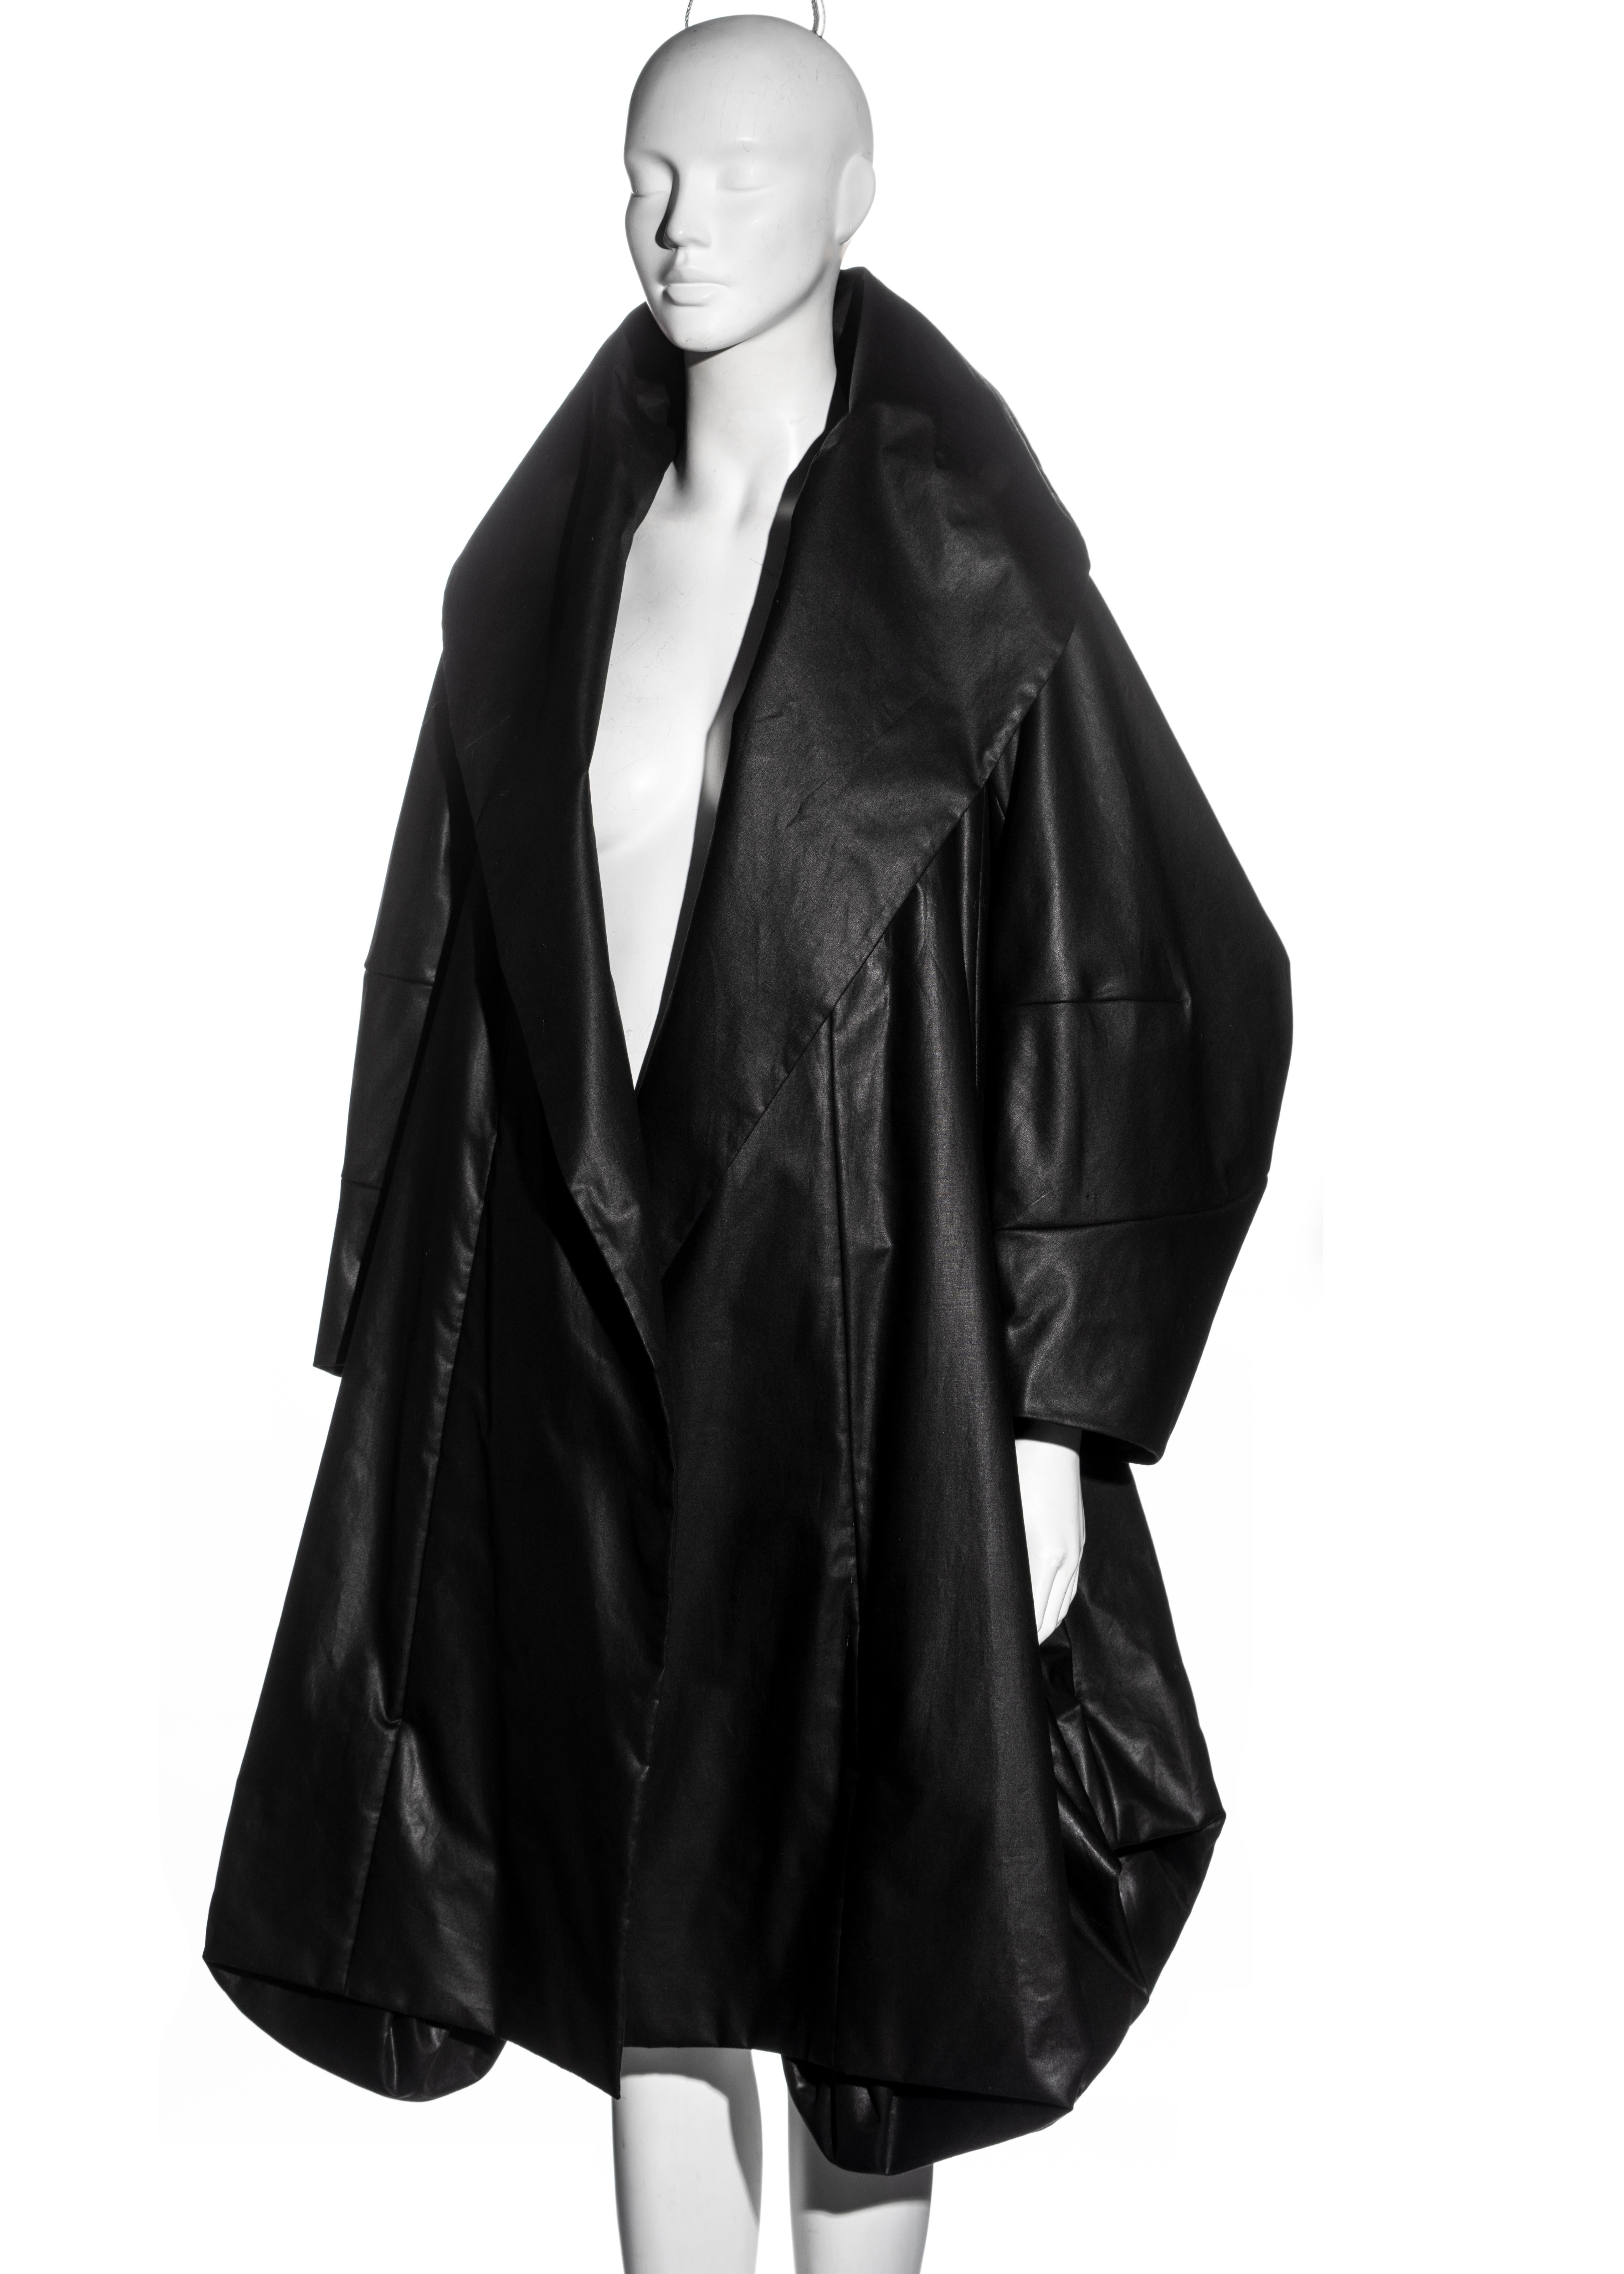 Christian Dior by John Galliano black waxed cotton opera coat, ss 1999 In Excellent Condition For Sale In London, GB